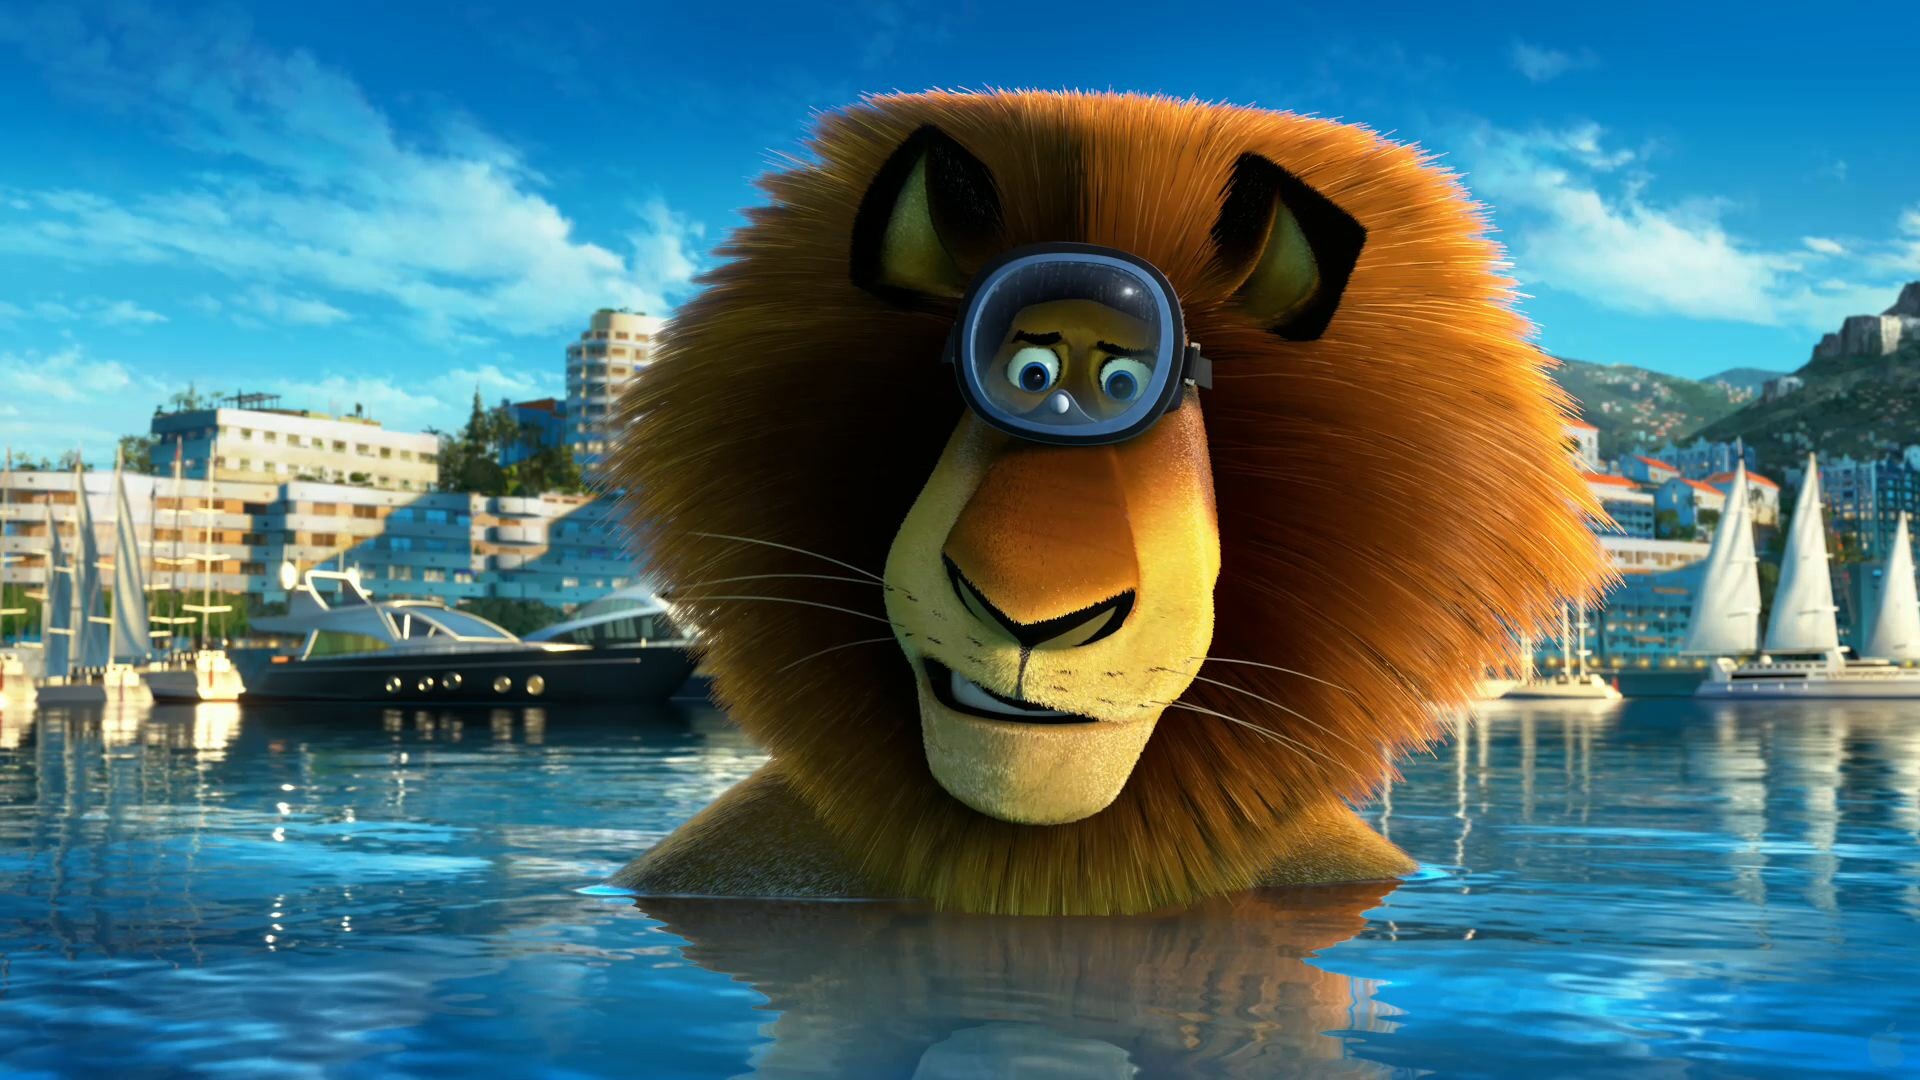 Madagascar (Movie): Dreamworks film, Europe's Most Wanted, Alex the Lion. 1920x1080 Full HD Wallpaper.